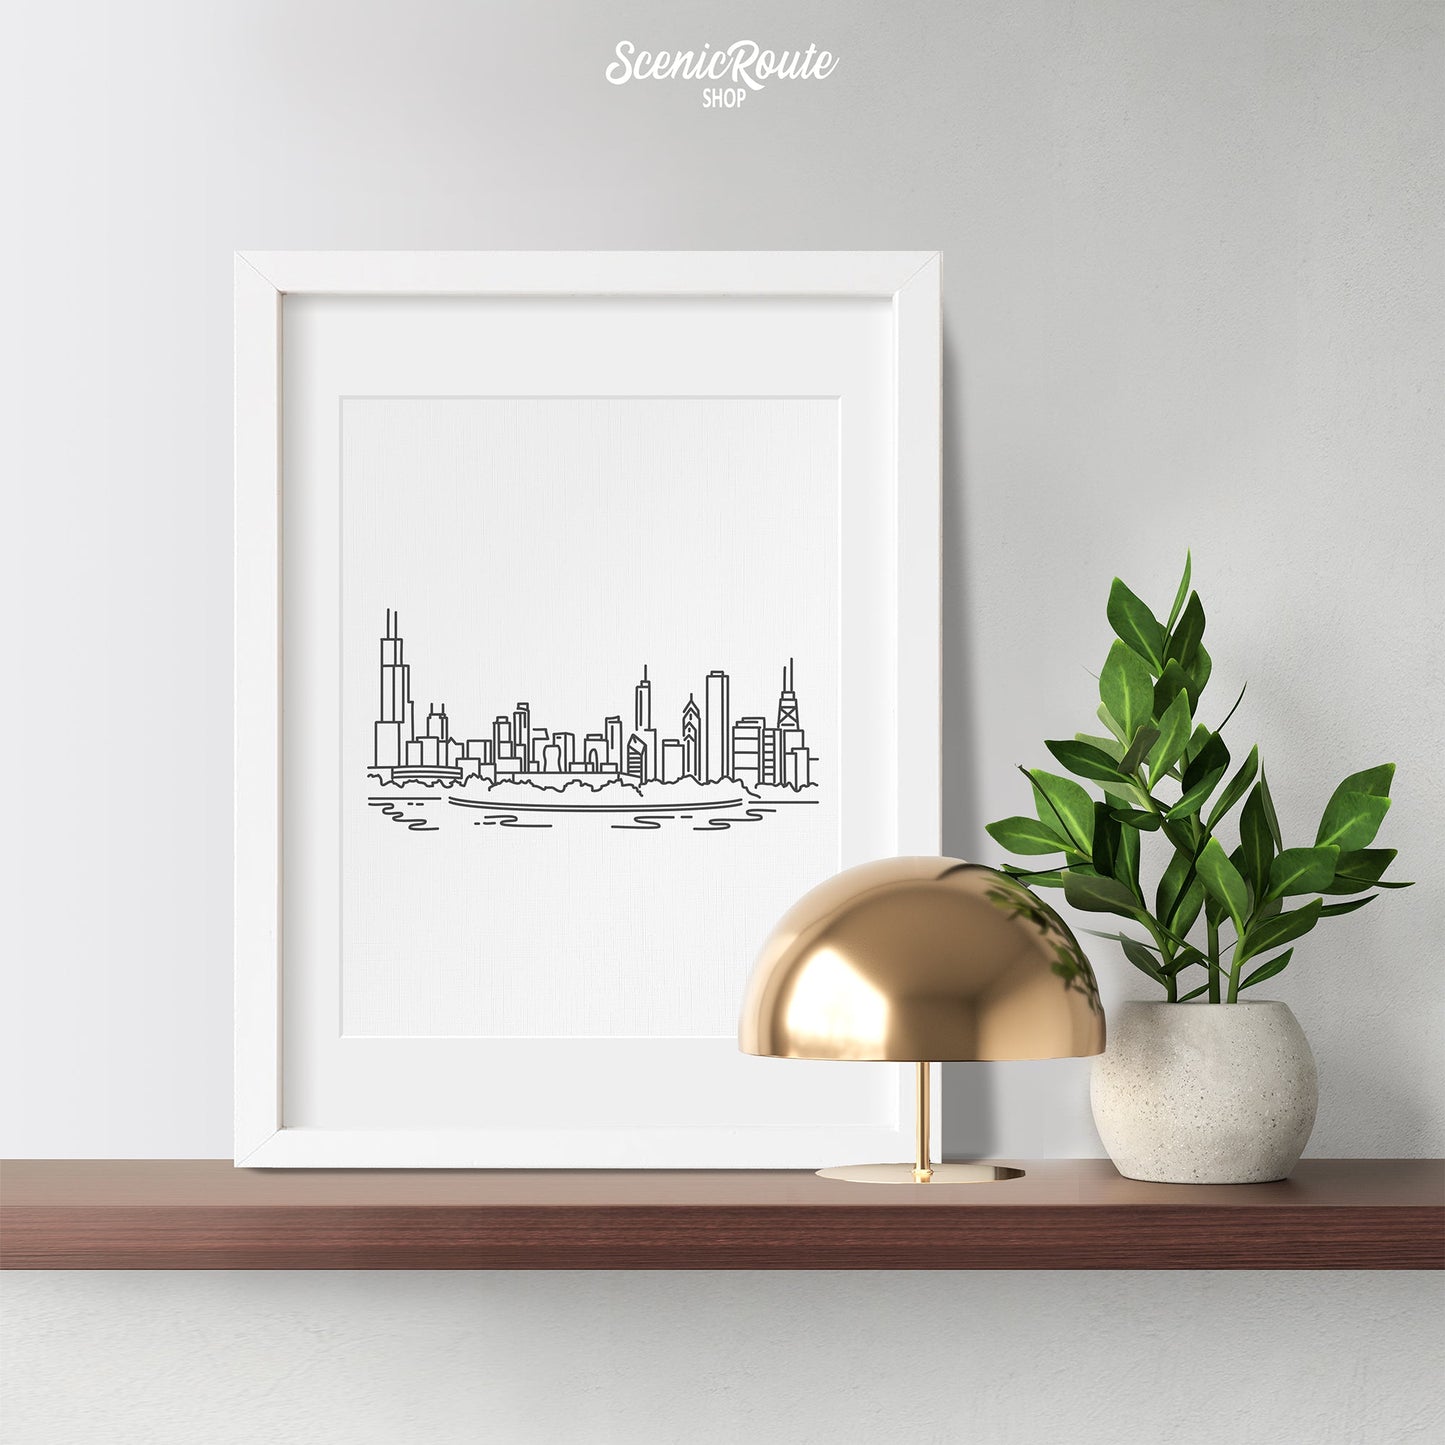 A framed line art drawing of the Chicago Skyline on a wood shelf with a plant and lamp